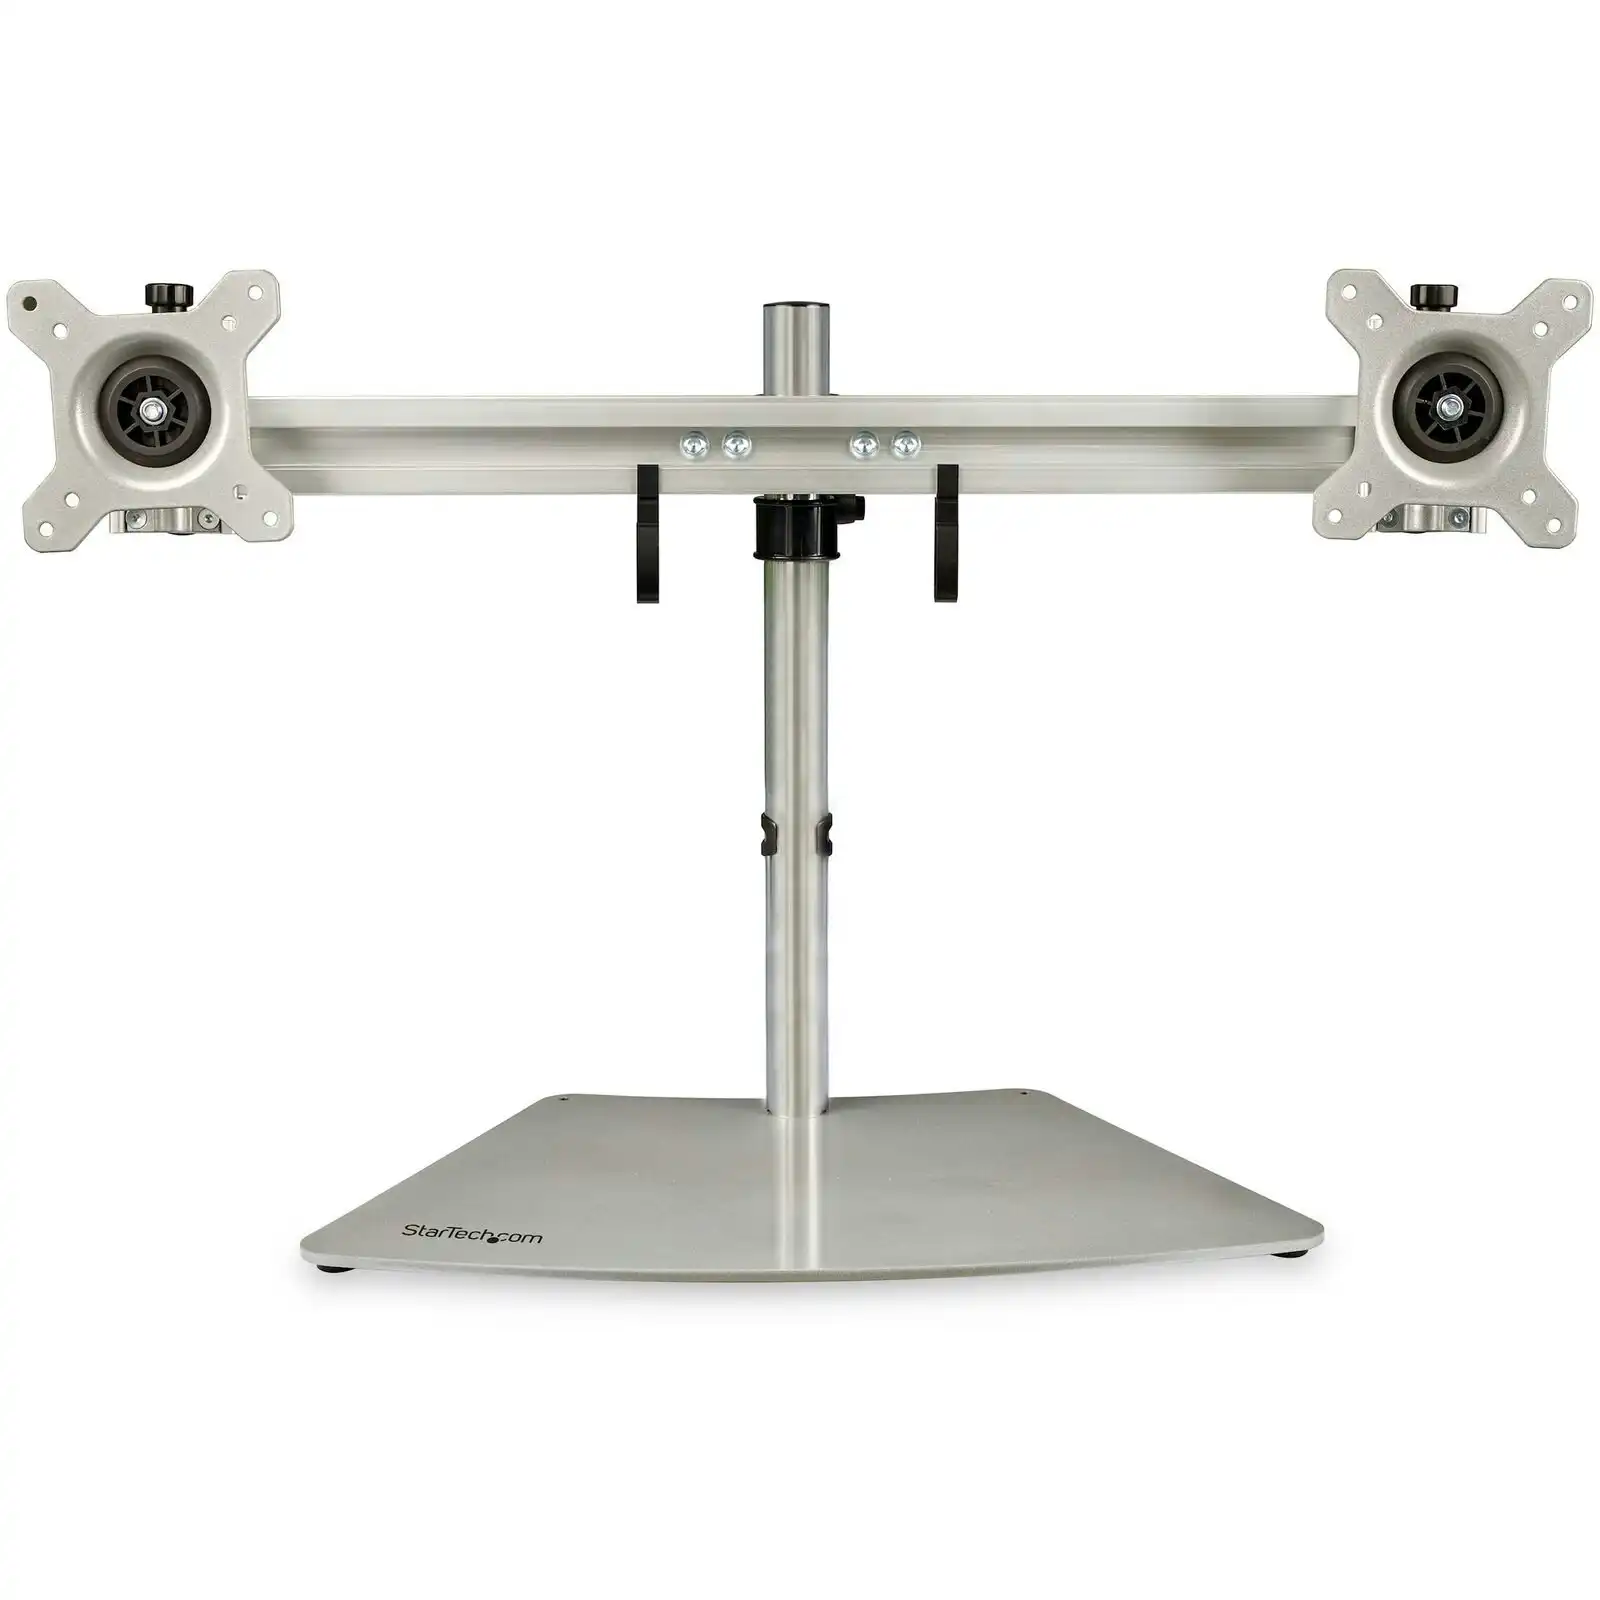 Star Tech Dual Vertical 8kg Per Monitor Stand VESA Mount for 27-34in Display SLV